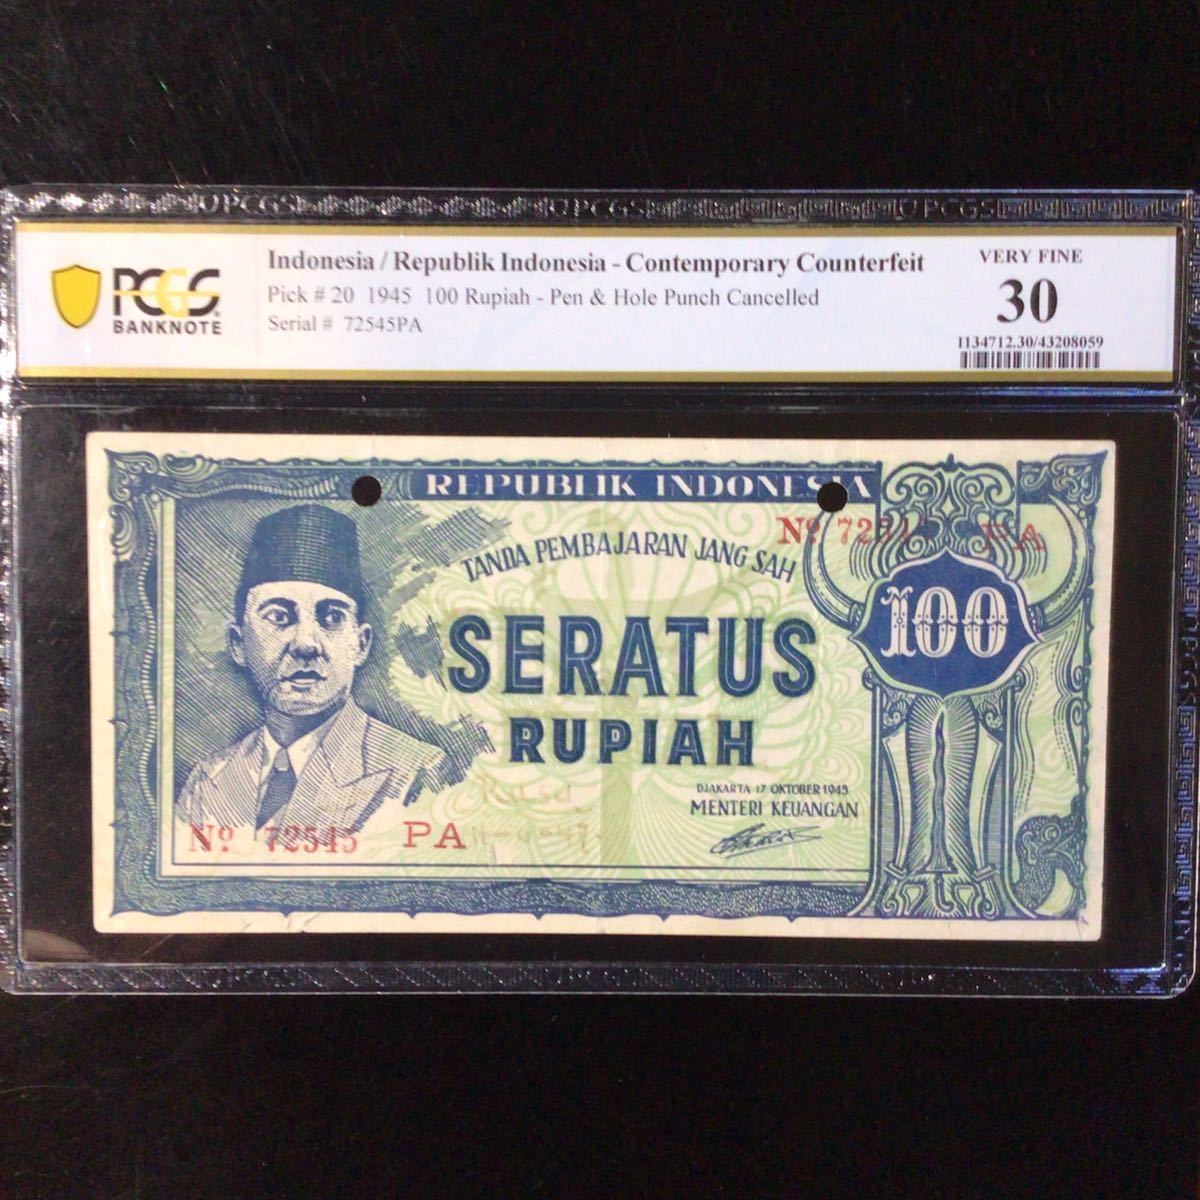 World Banknote Grading INDONESIA《Contemporary Counterfeit》100 Rupiah【1945】『PCGS Grading Very Fine 30』.